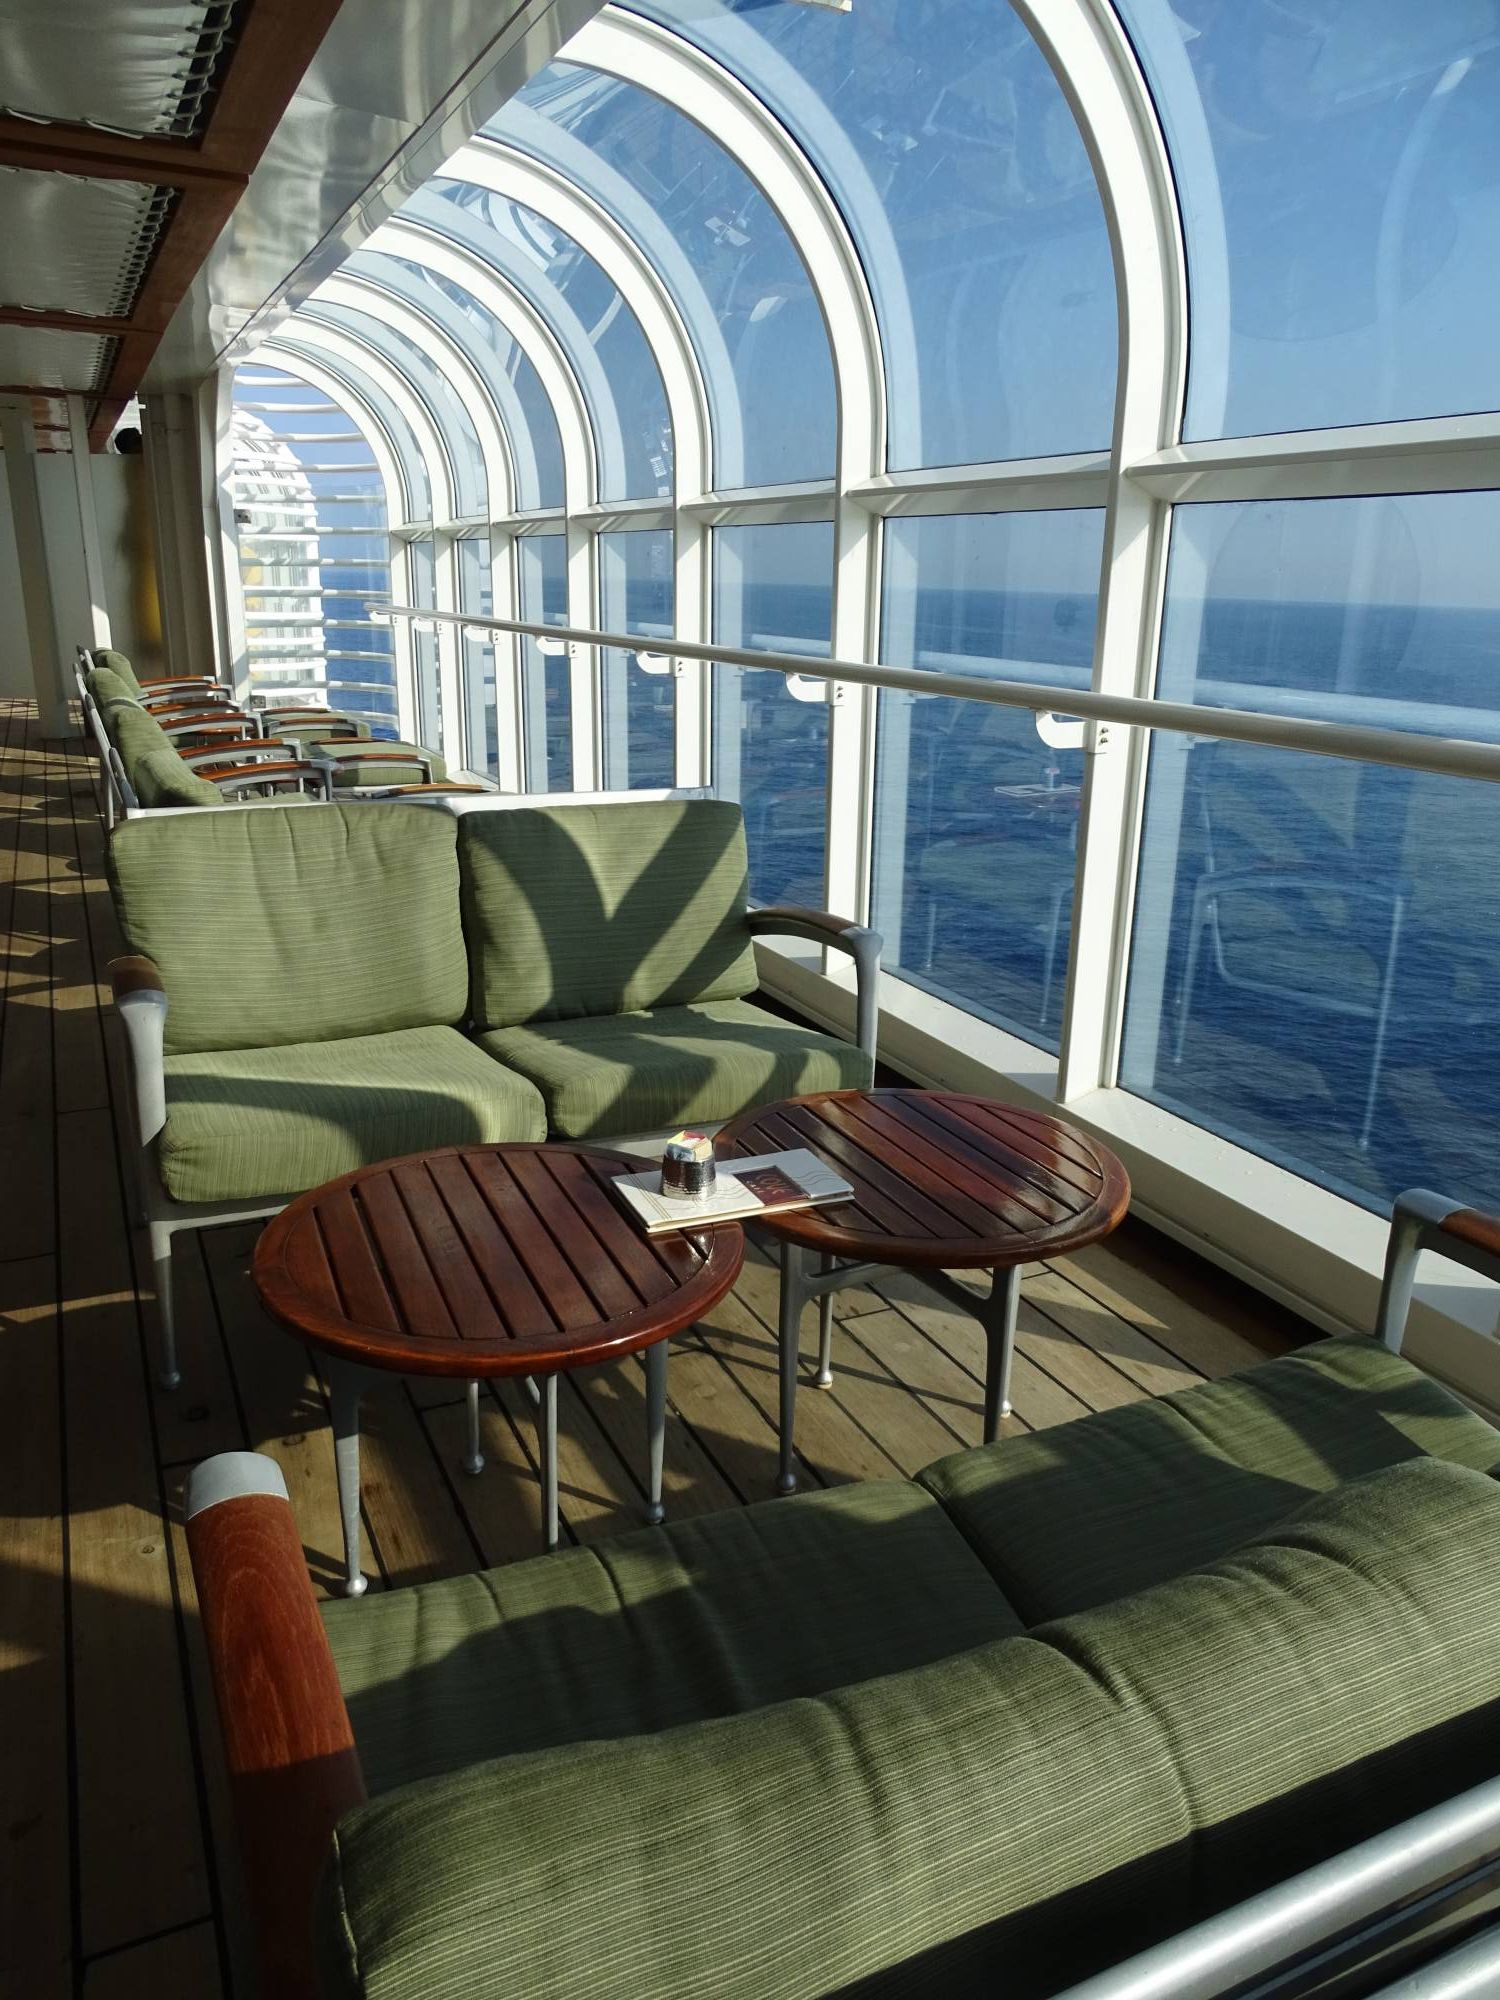 Get answers to the most common concerns about taking a Disney Cruise | PassPorter.com